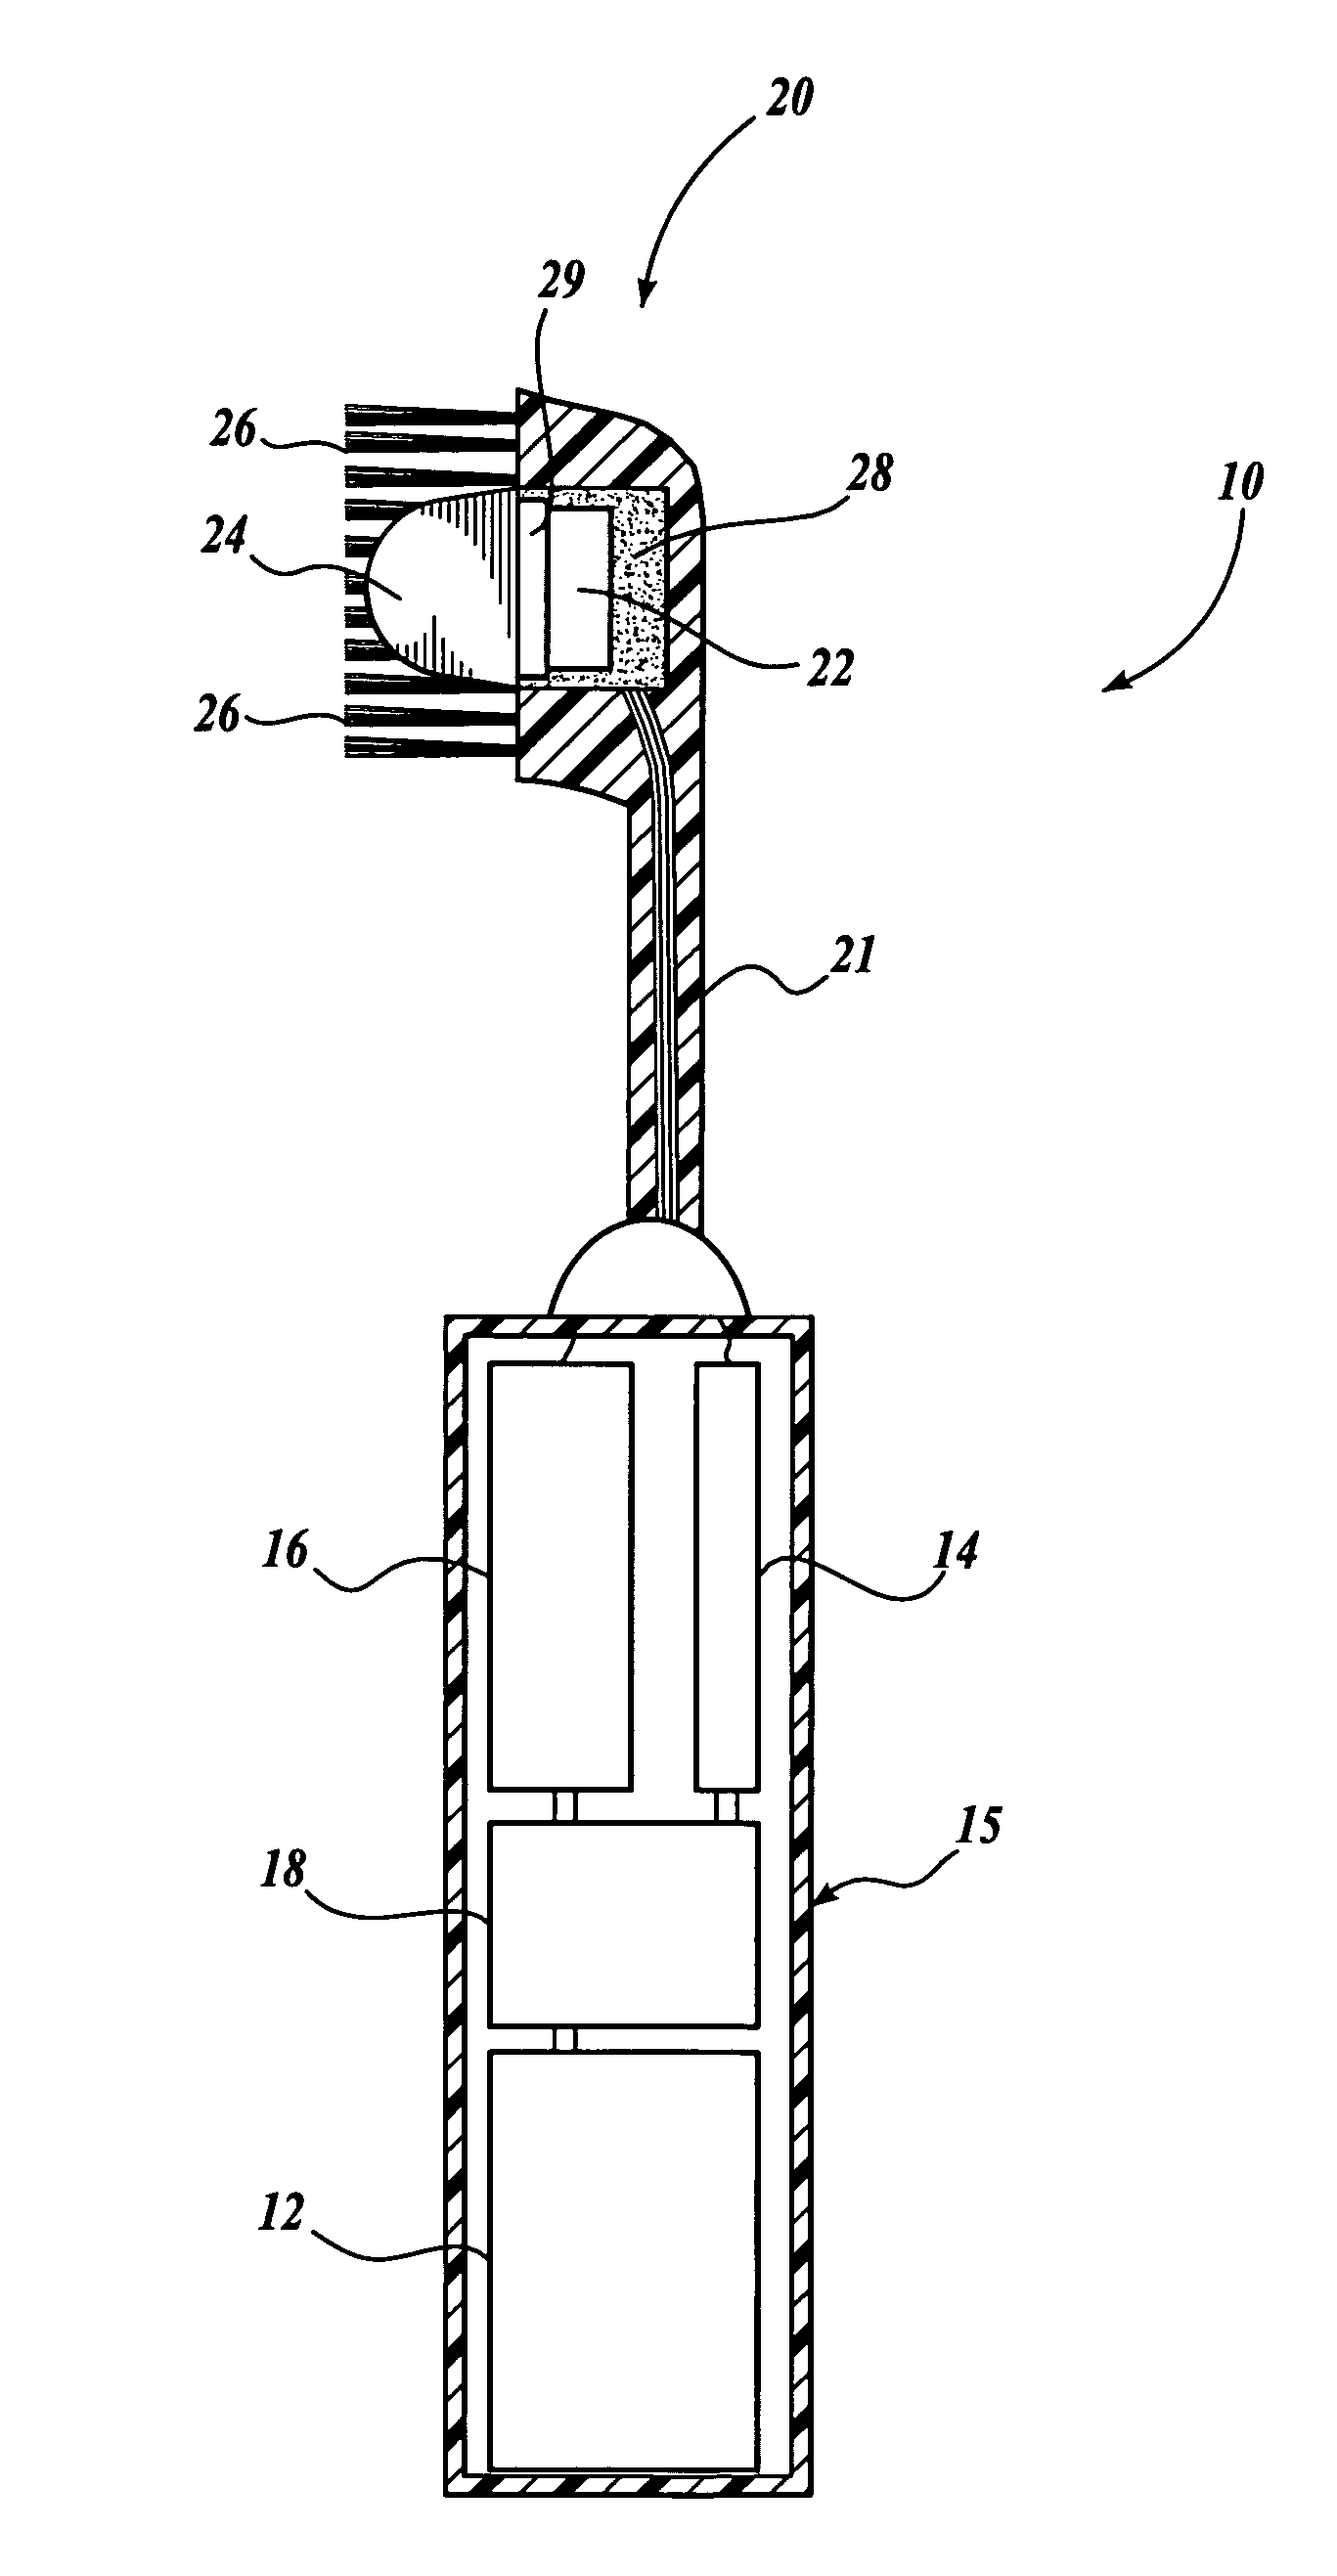 Toothbrush employing an acoustic waveguide